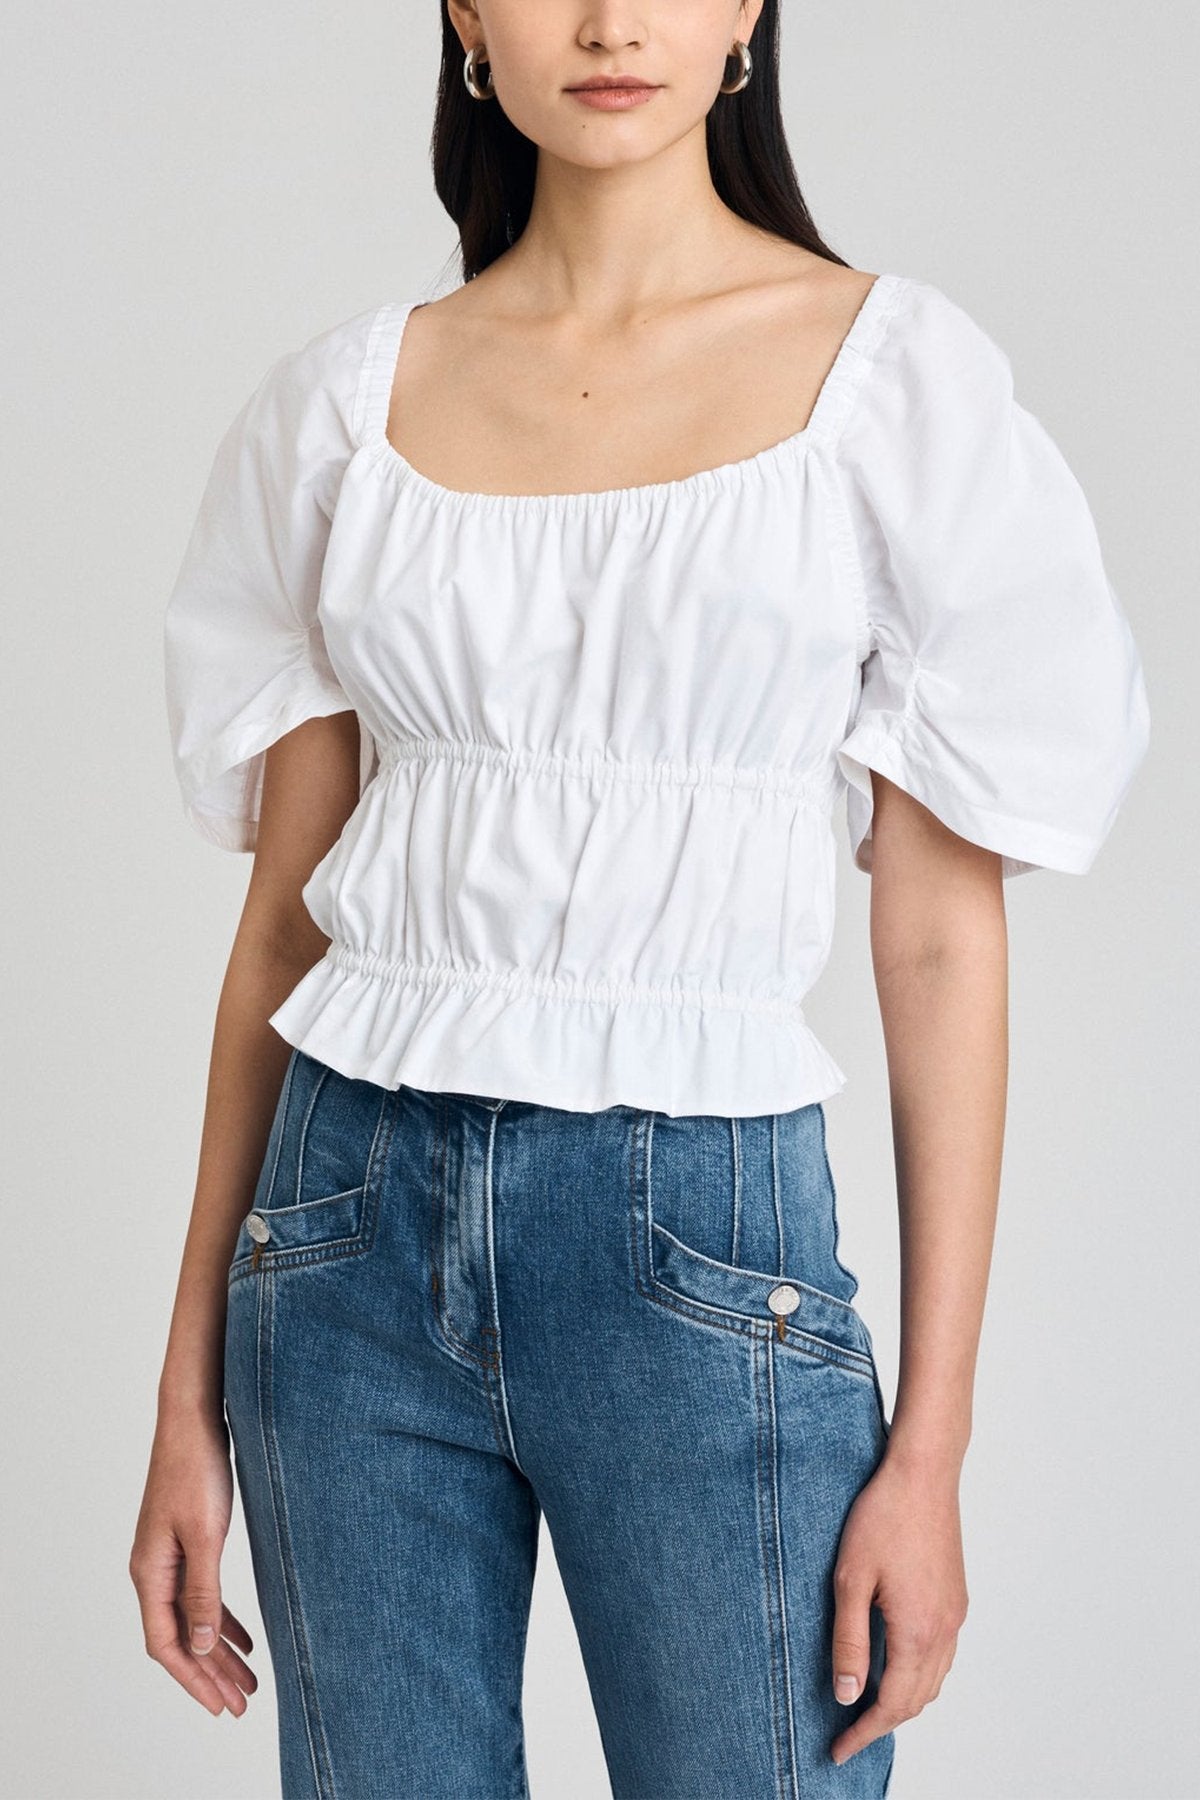 Elora Puff Sleeve Smocked Top in White - shop-olivia.com